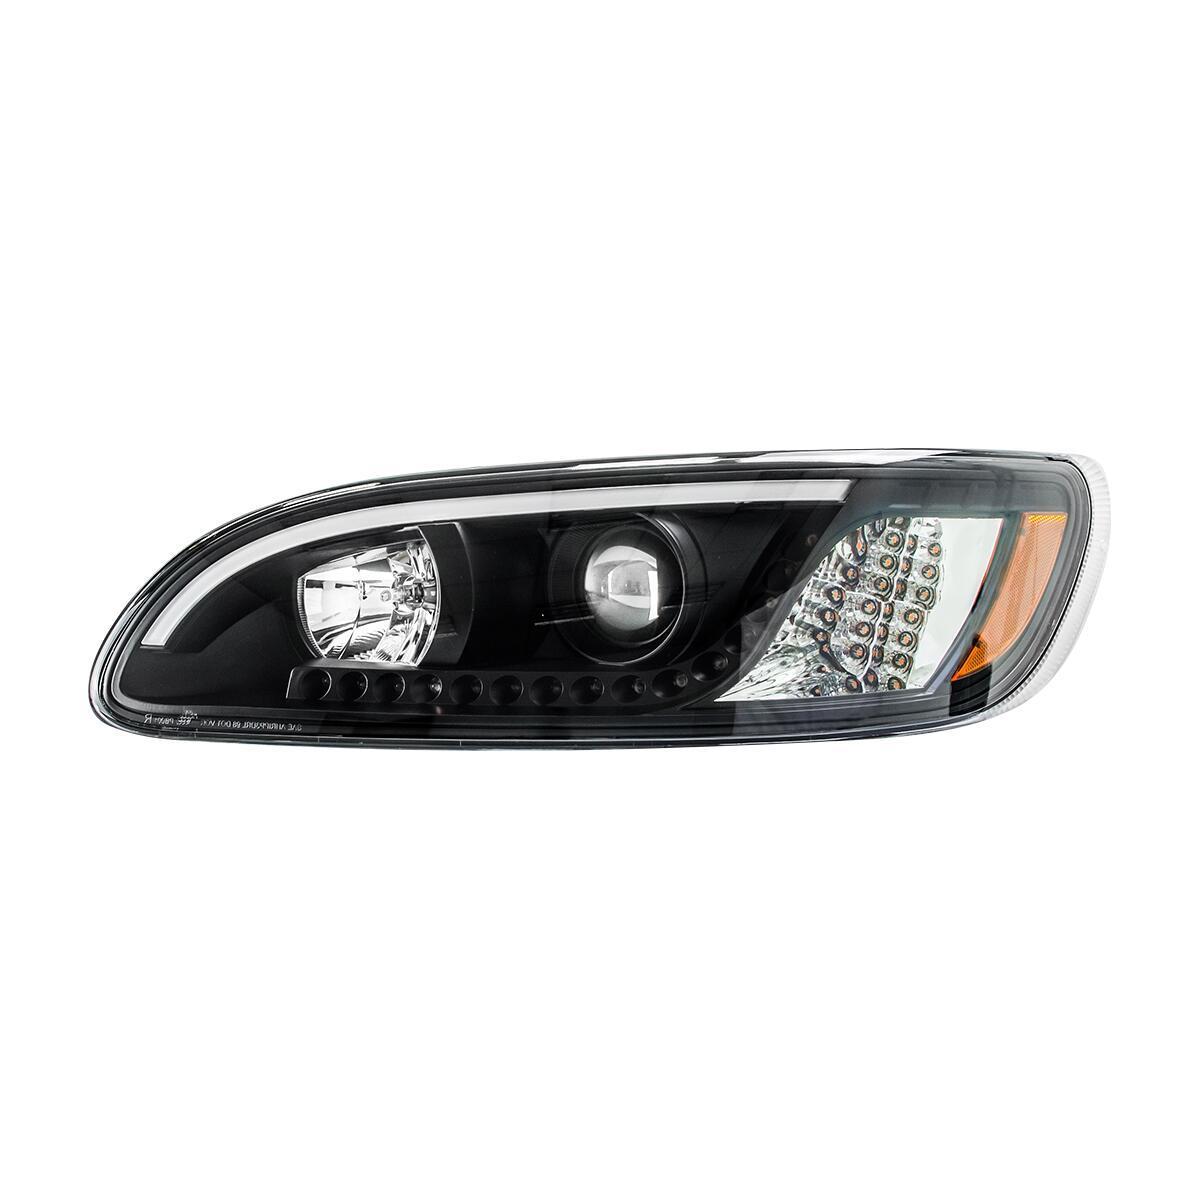 PETERBILT 386/387 HEADLIGHT WITH WHITE HIGH POWER LED POSITION/DAYTIME RUNNING AND LED TURN SIGNAL LIGHT